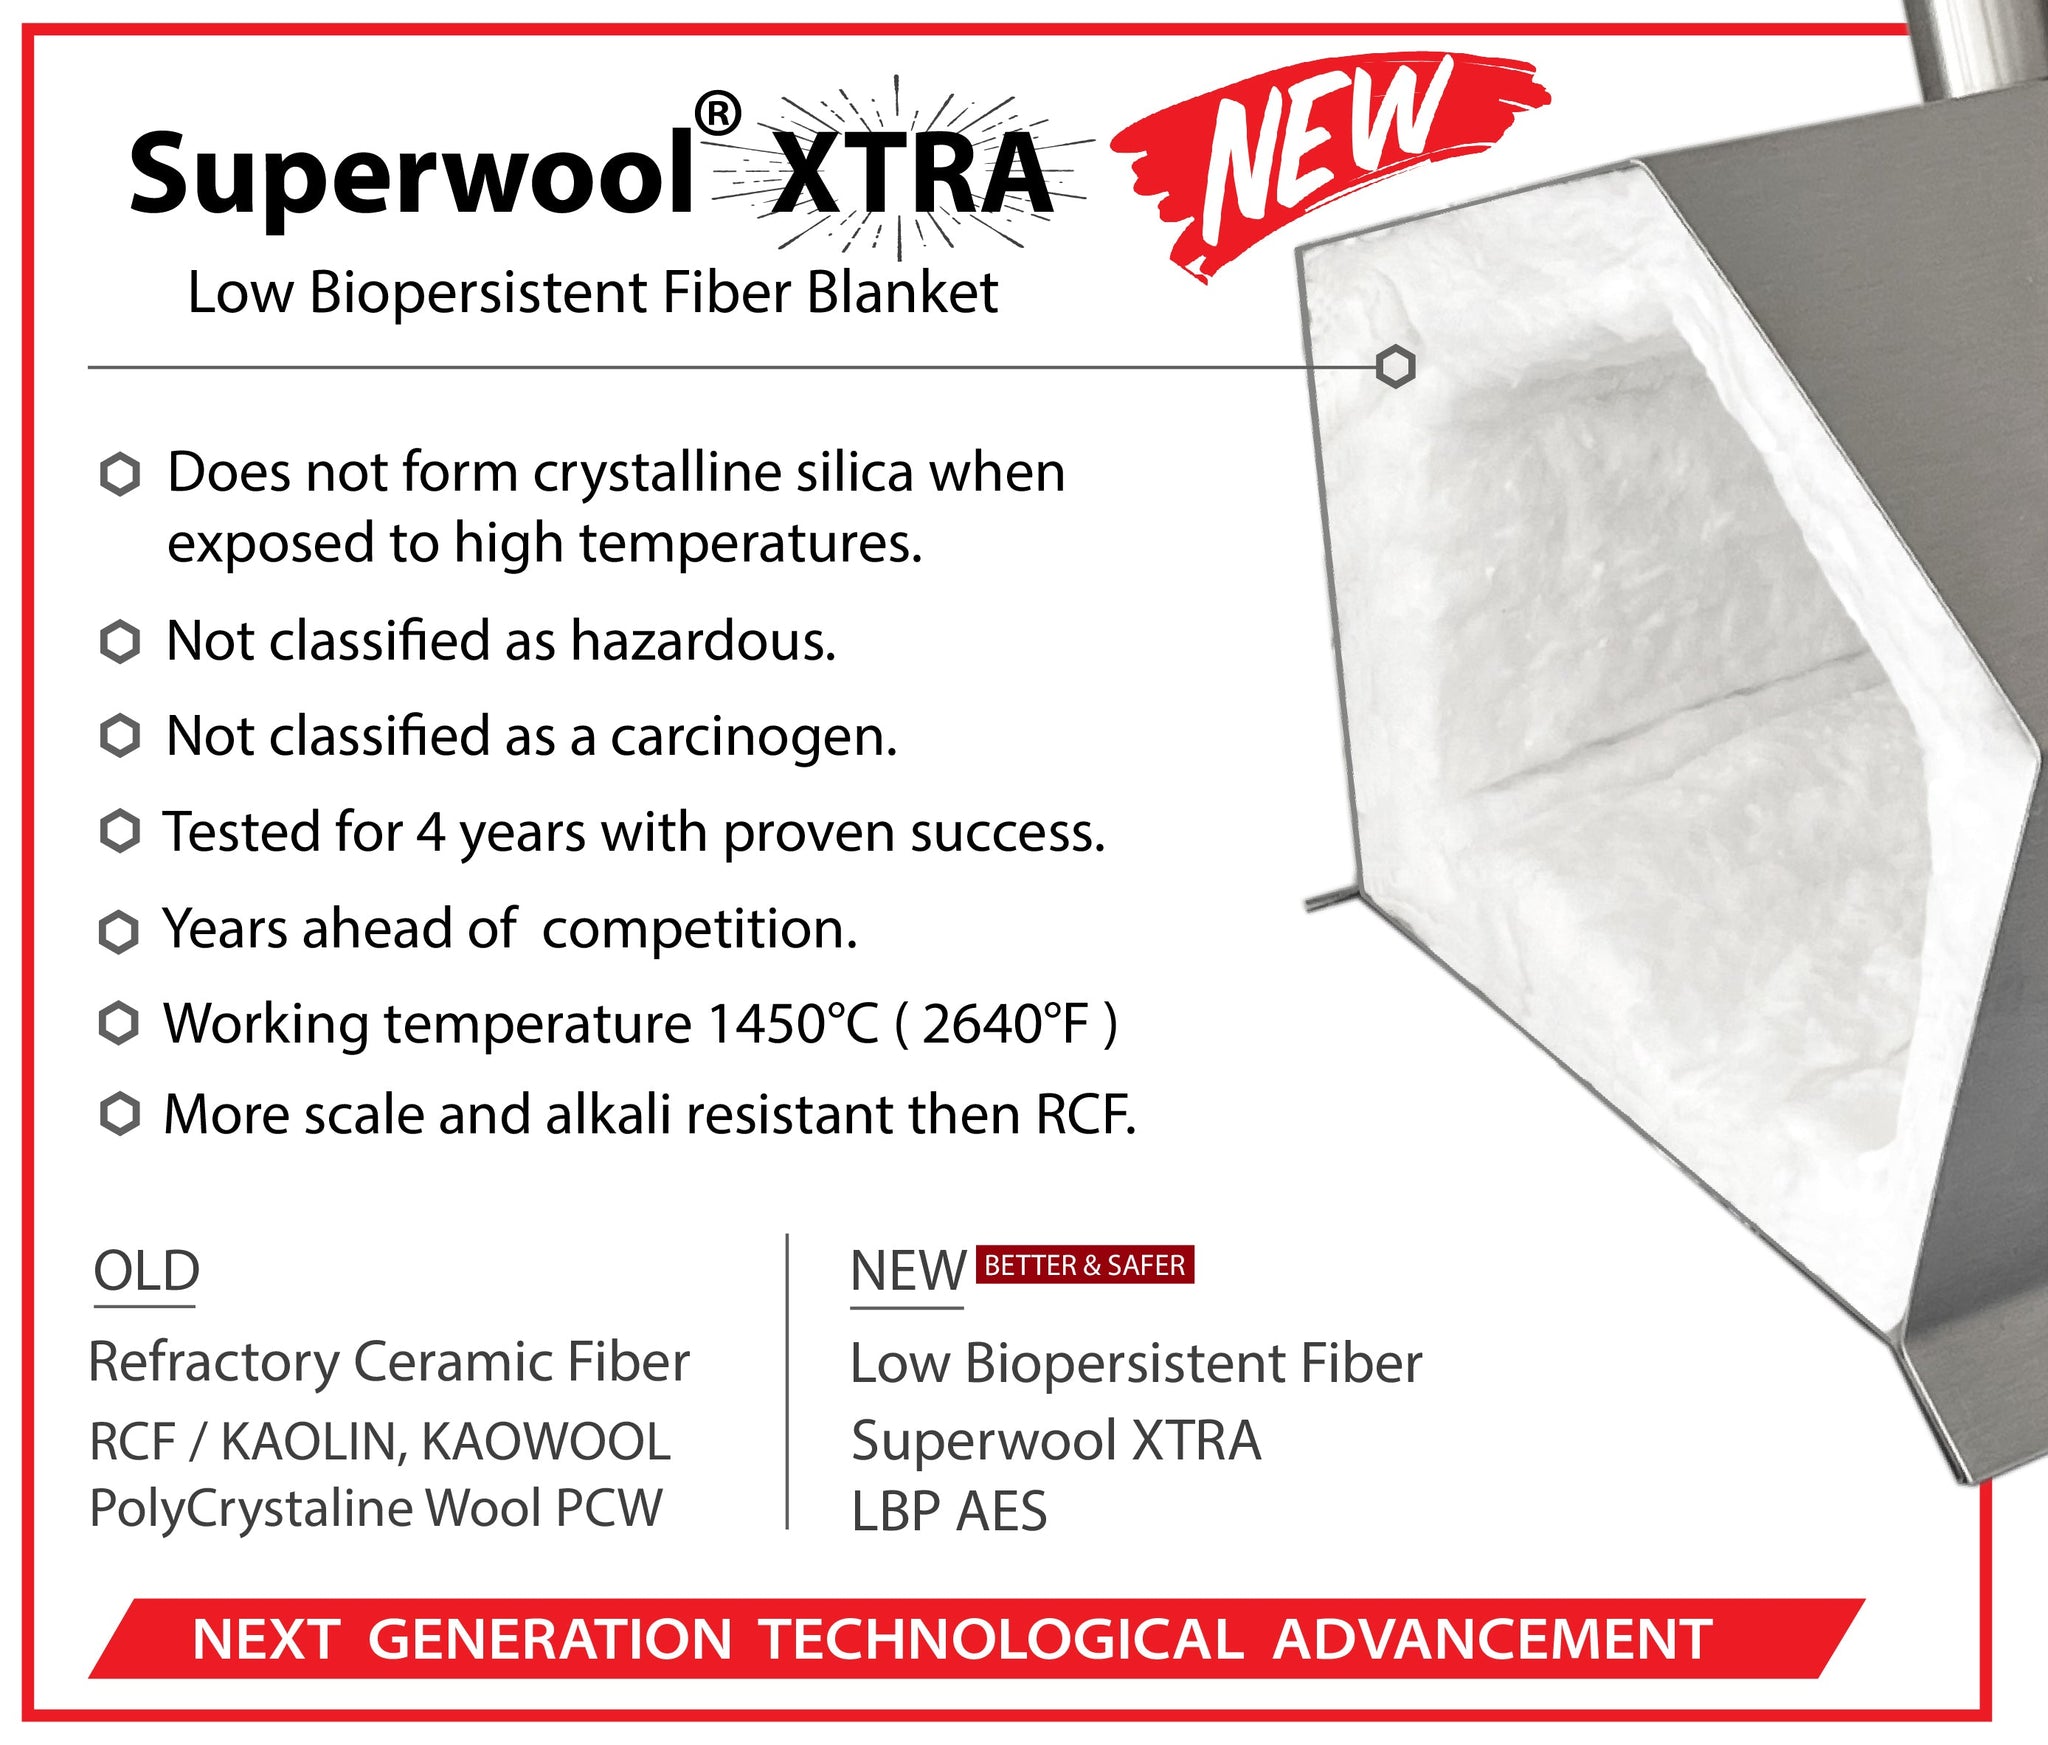  Mr Volcano Superwool Xtra Insulation Blanket for Hero 1 Forge, High Heat 2640°F